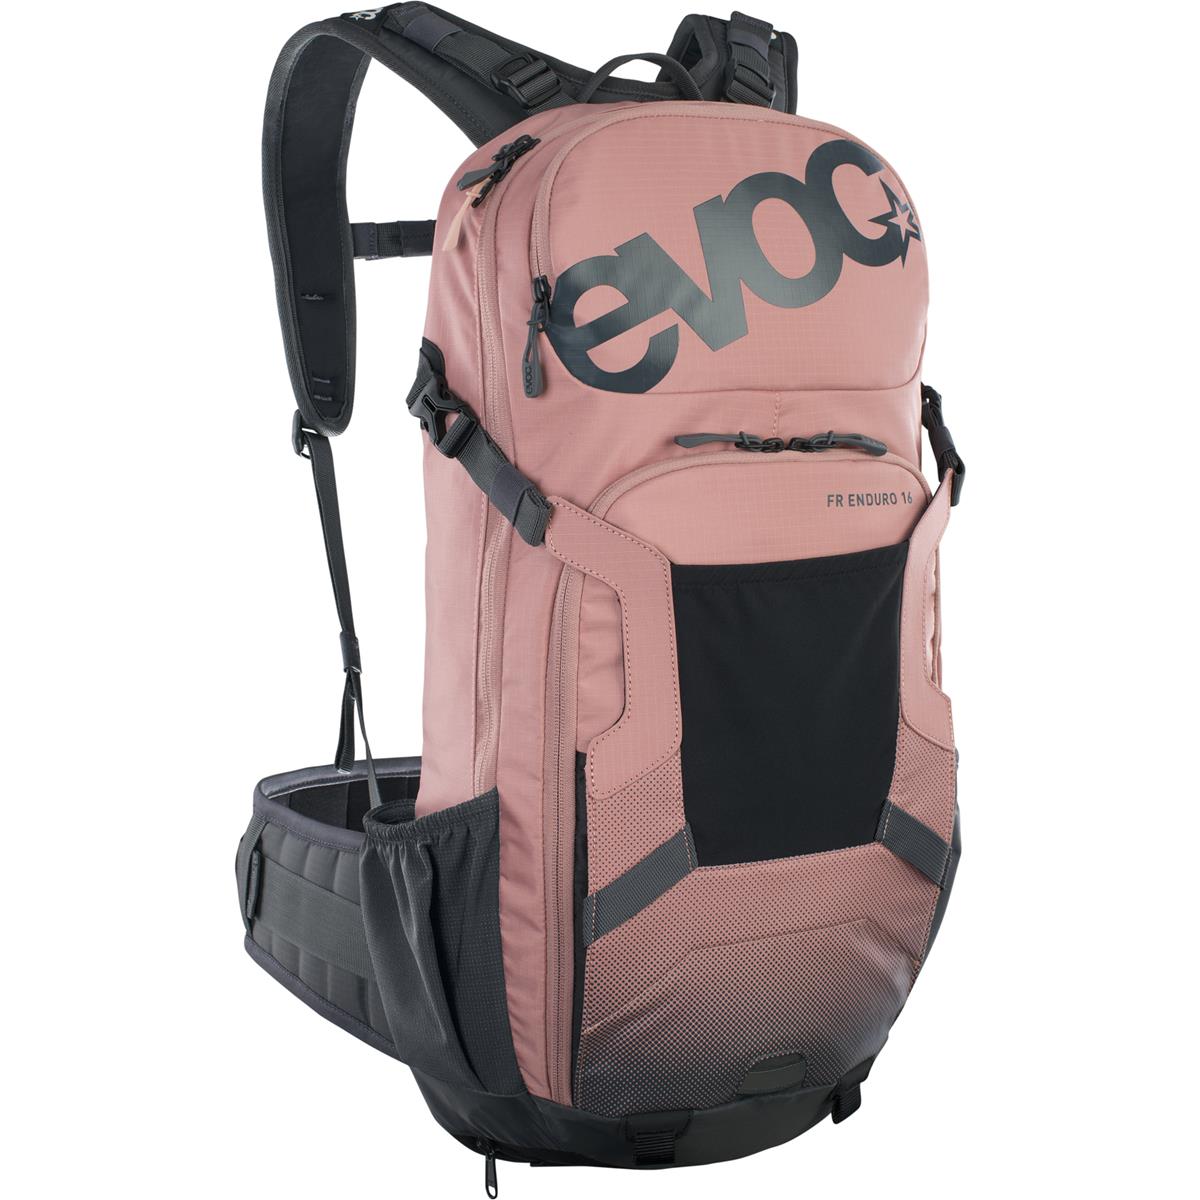 Evoc Protector Backpack FR Enduro 16 16L - Dusty Pink/Carbon Gray